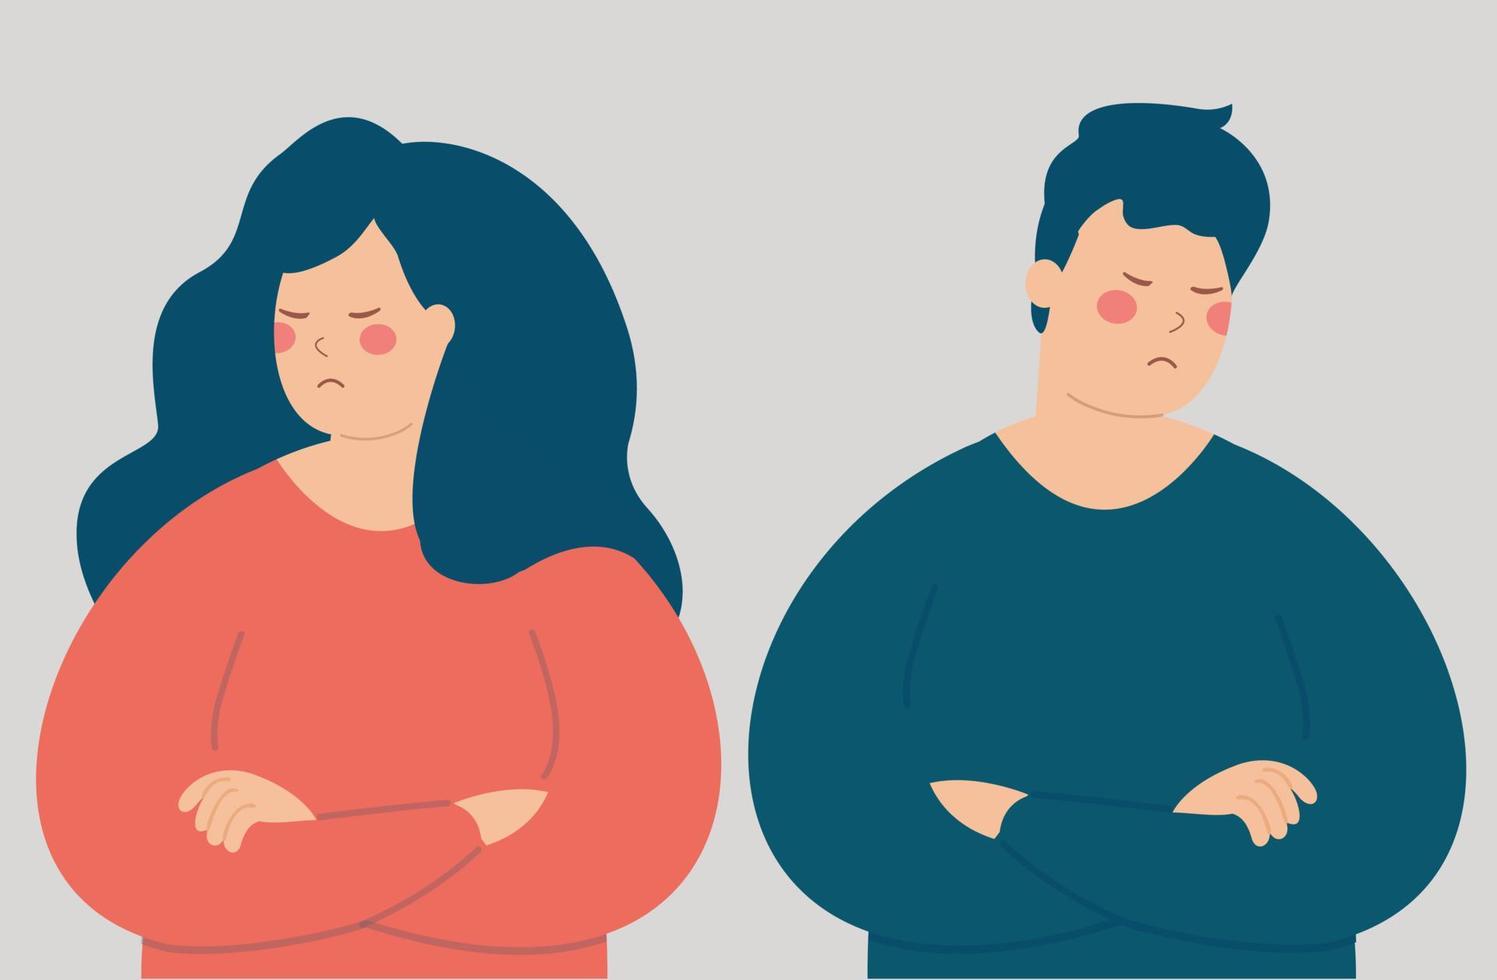 Young woman and man on the brink of breakup or divorce. Heartbroken sad couple. Two friends argue and quarrel look sad. Relationship difficulty, family crisis concept. Vector illustration